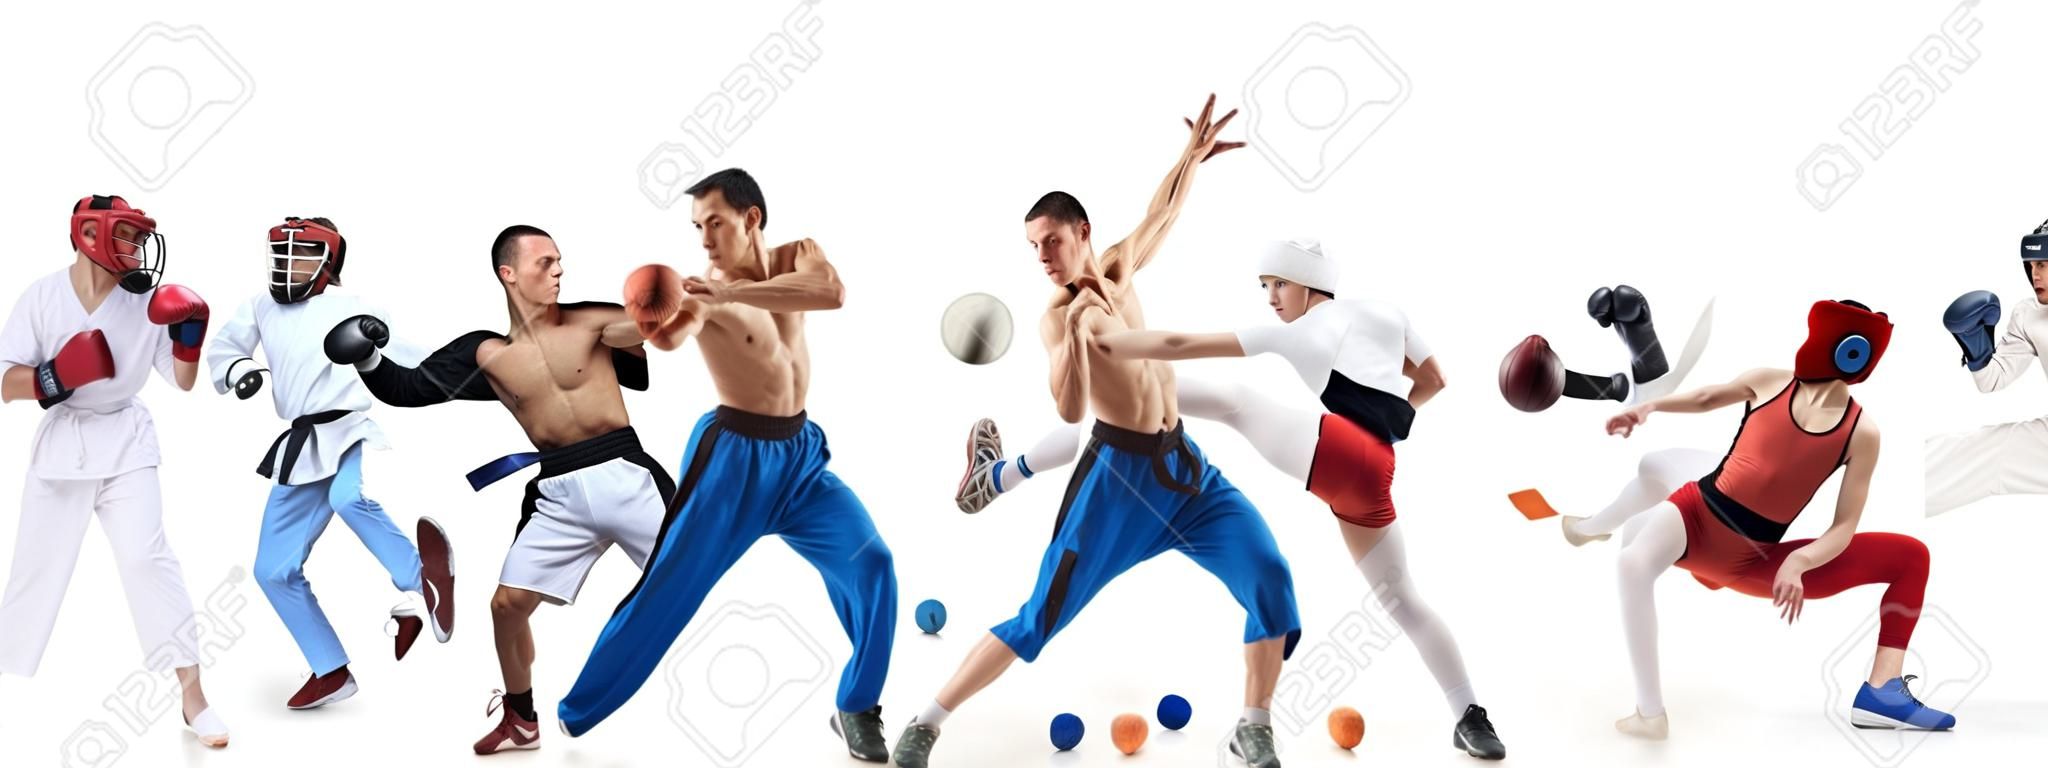 Sport collage about boxing, soccer, american football, basketball, ice hockey, fencing, jogging, taekwondo, tennis